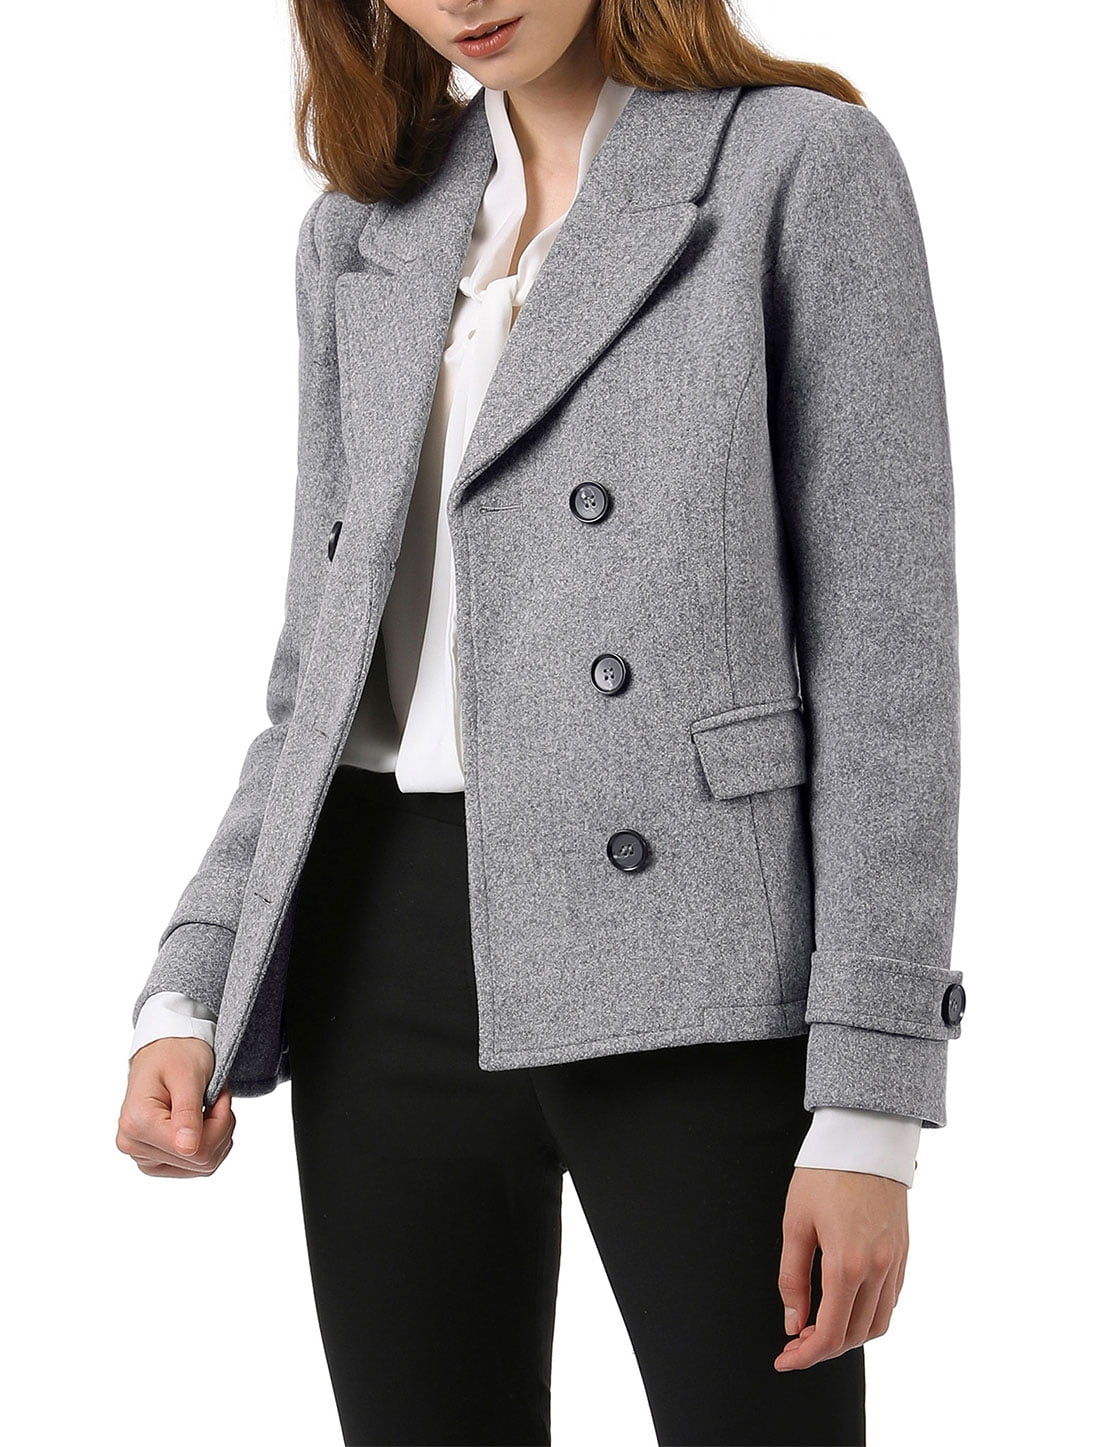 Women's Notched Lapel Outerwear Double Breasted Coat - Walmart.com ...